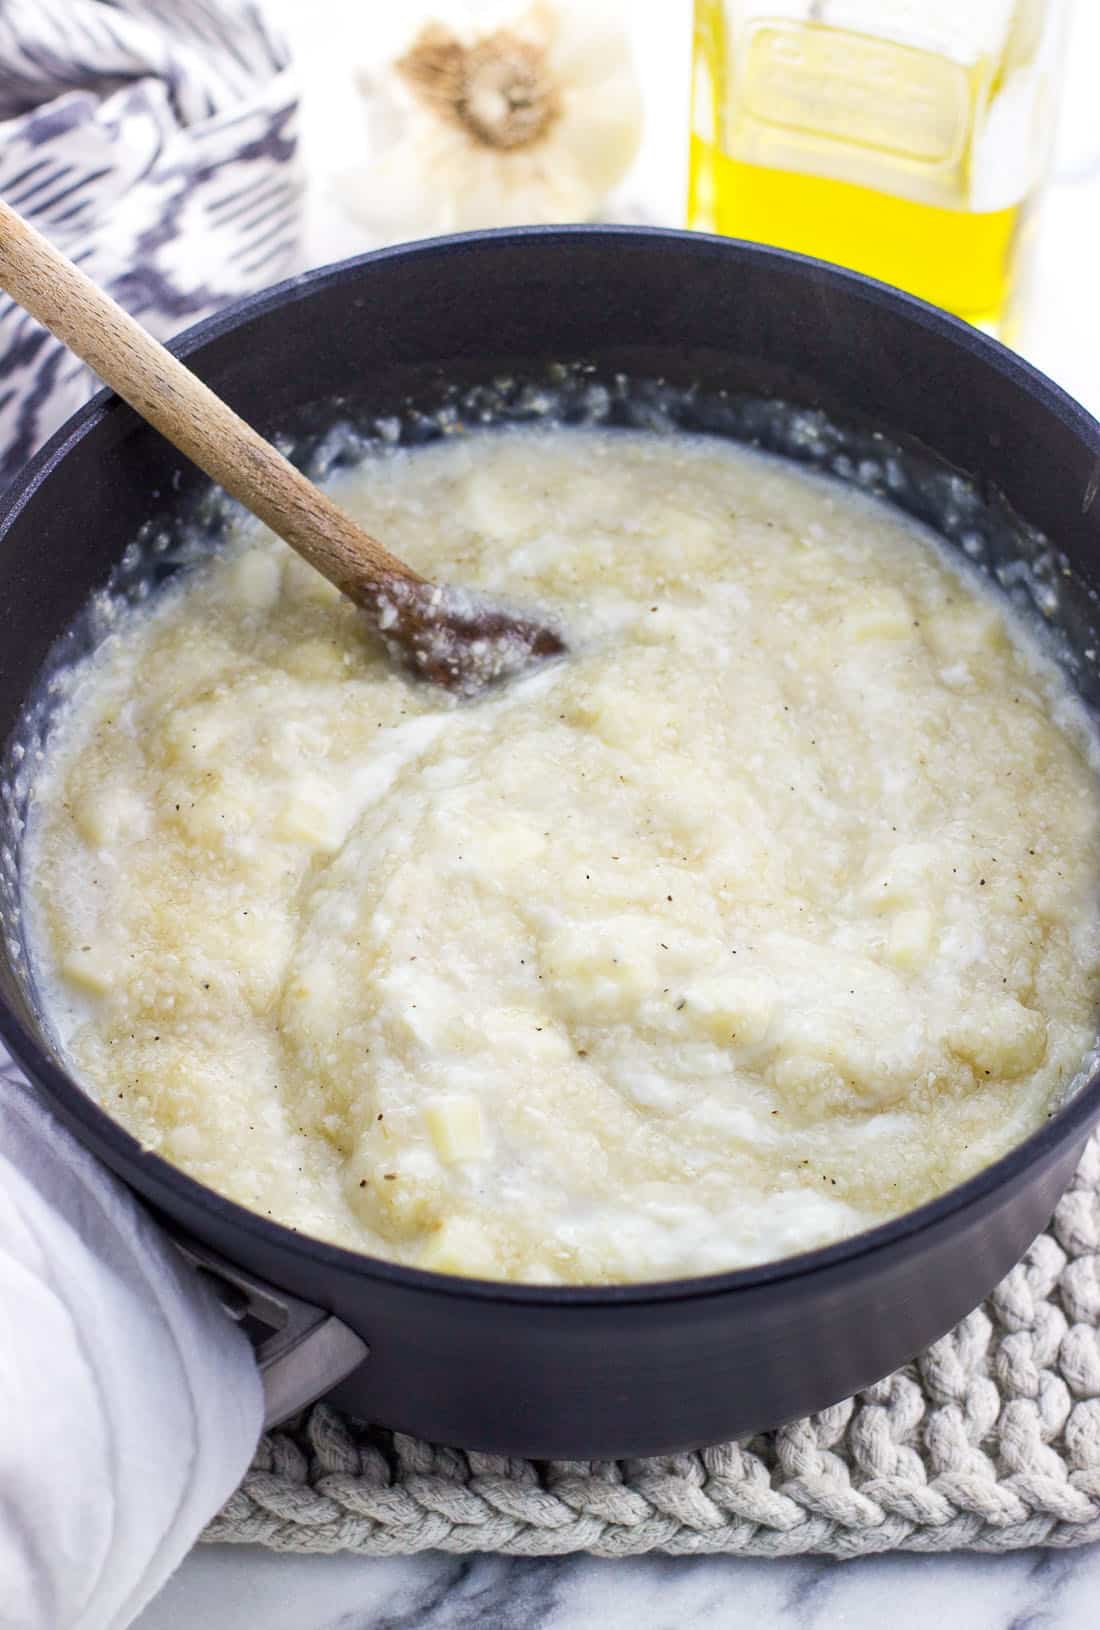 Cheese and milk being stirred into the cooked grits by a wooden spoon in a saucepan